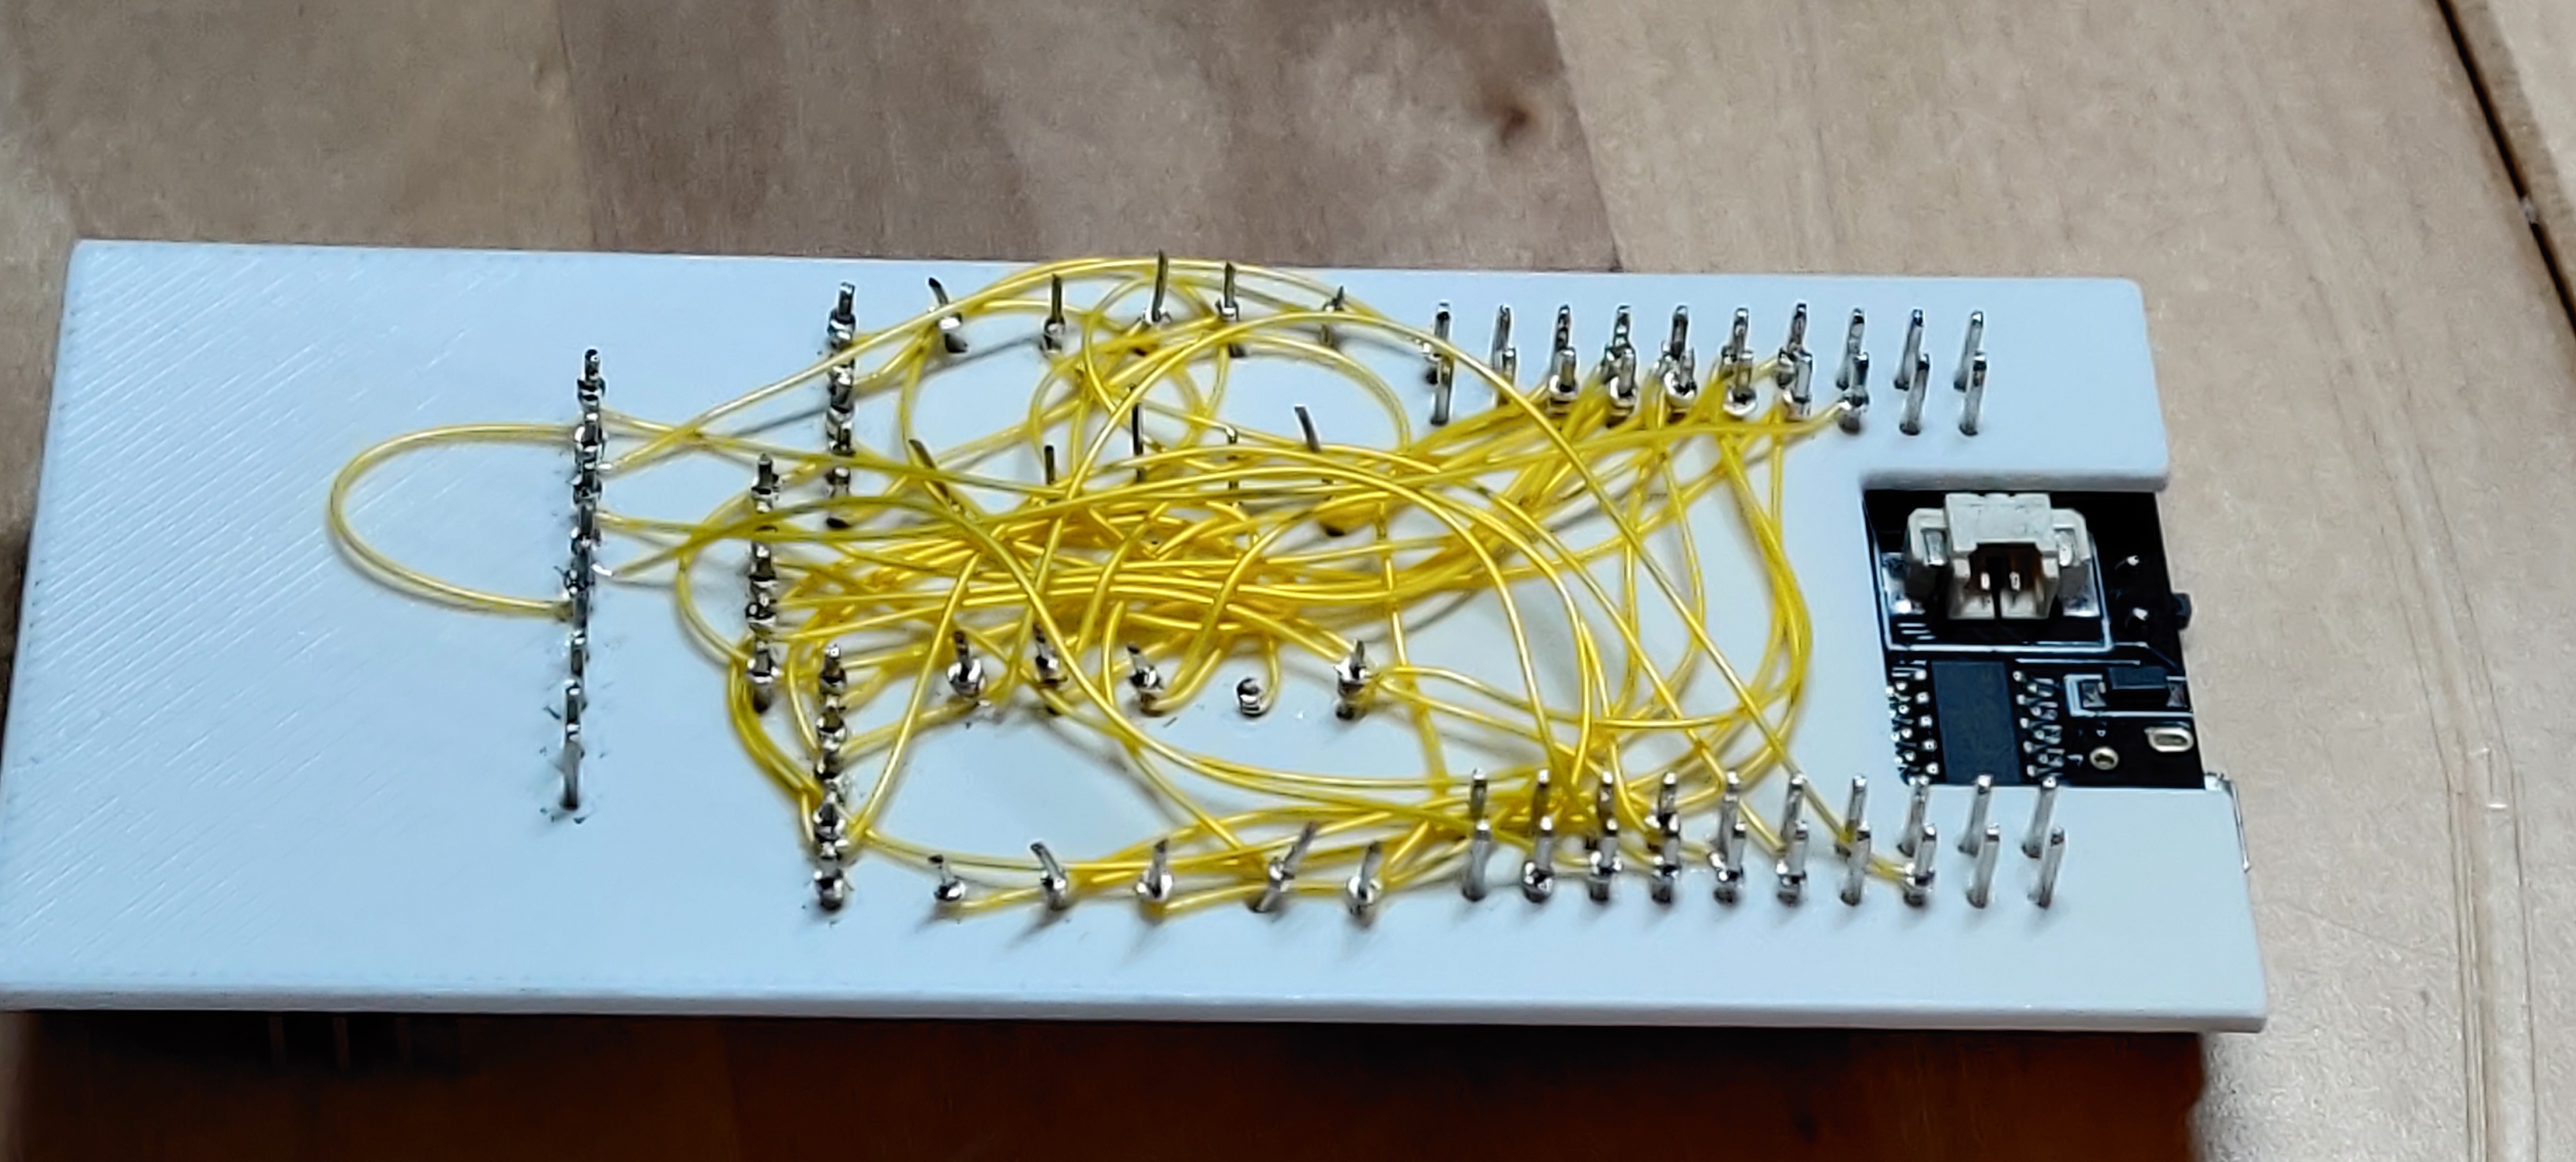 reverse of the populated board, many electrical wires
insulated in yellow plastic connect various pins